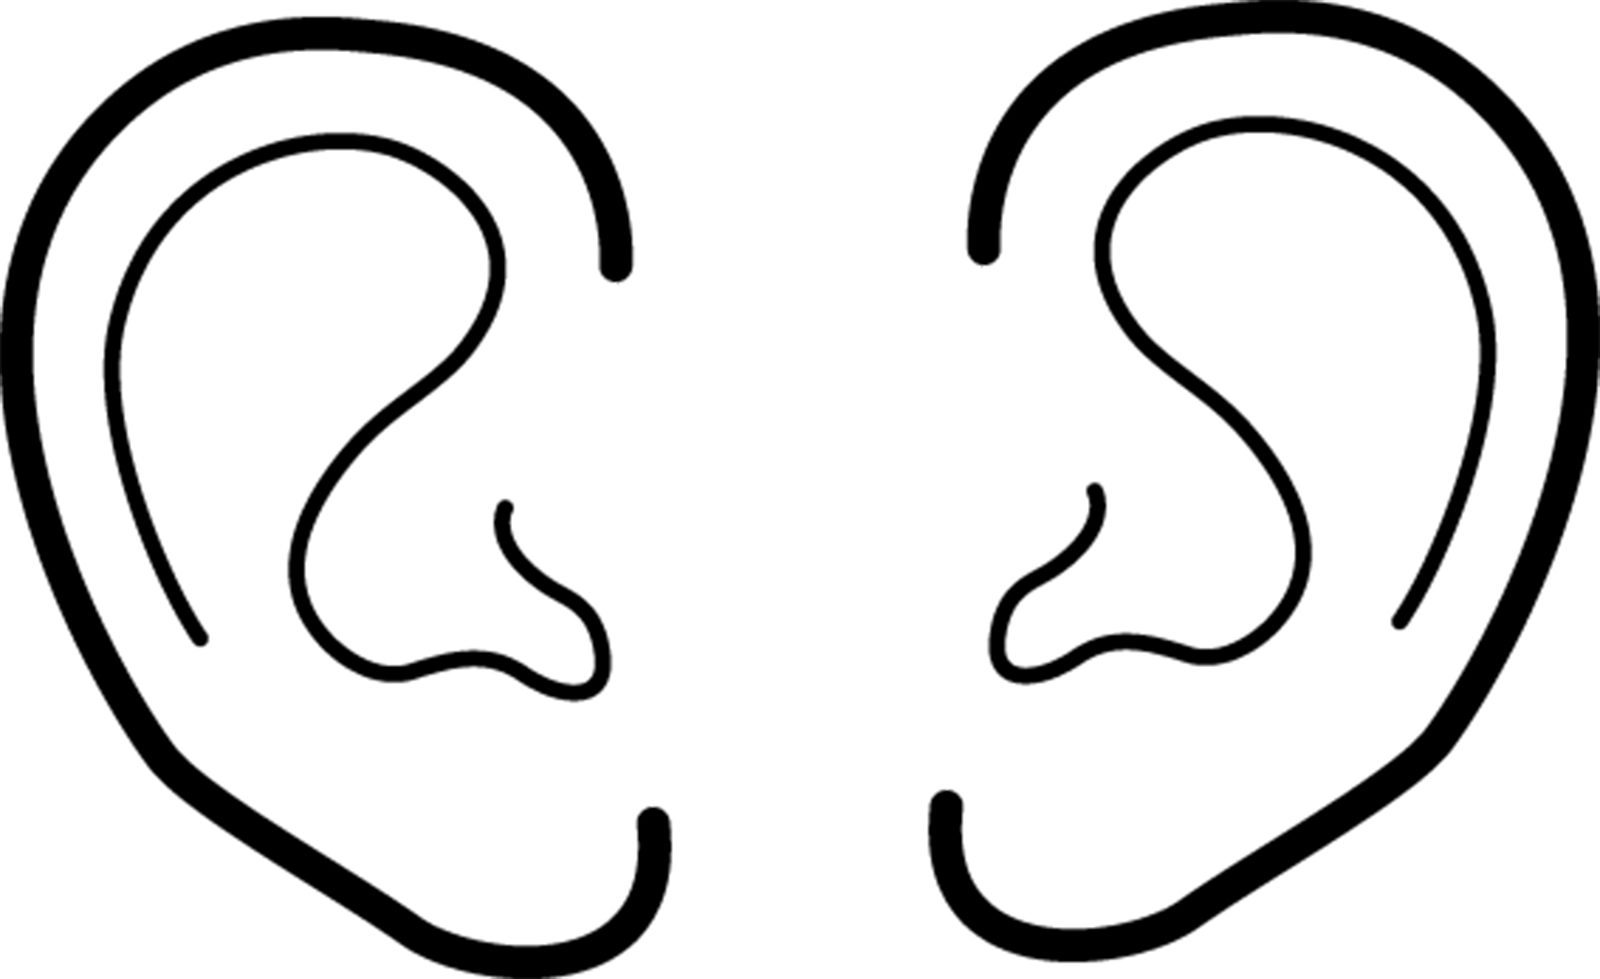 clipart images of ears - photo #22